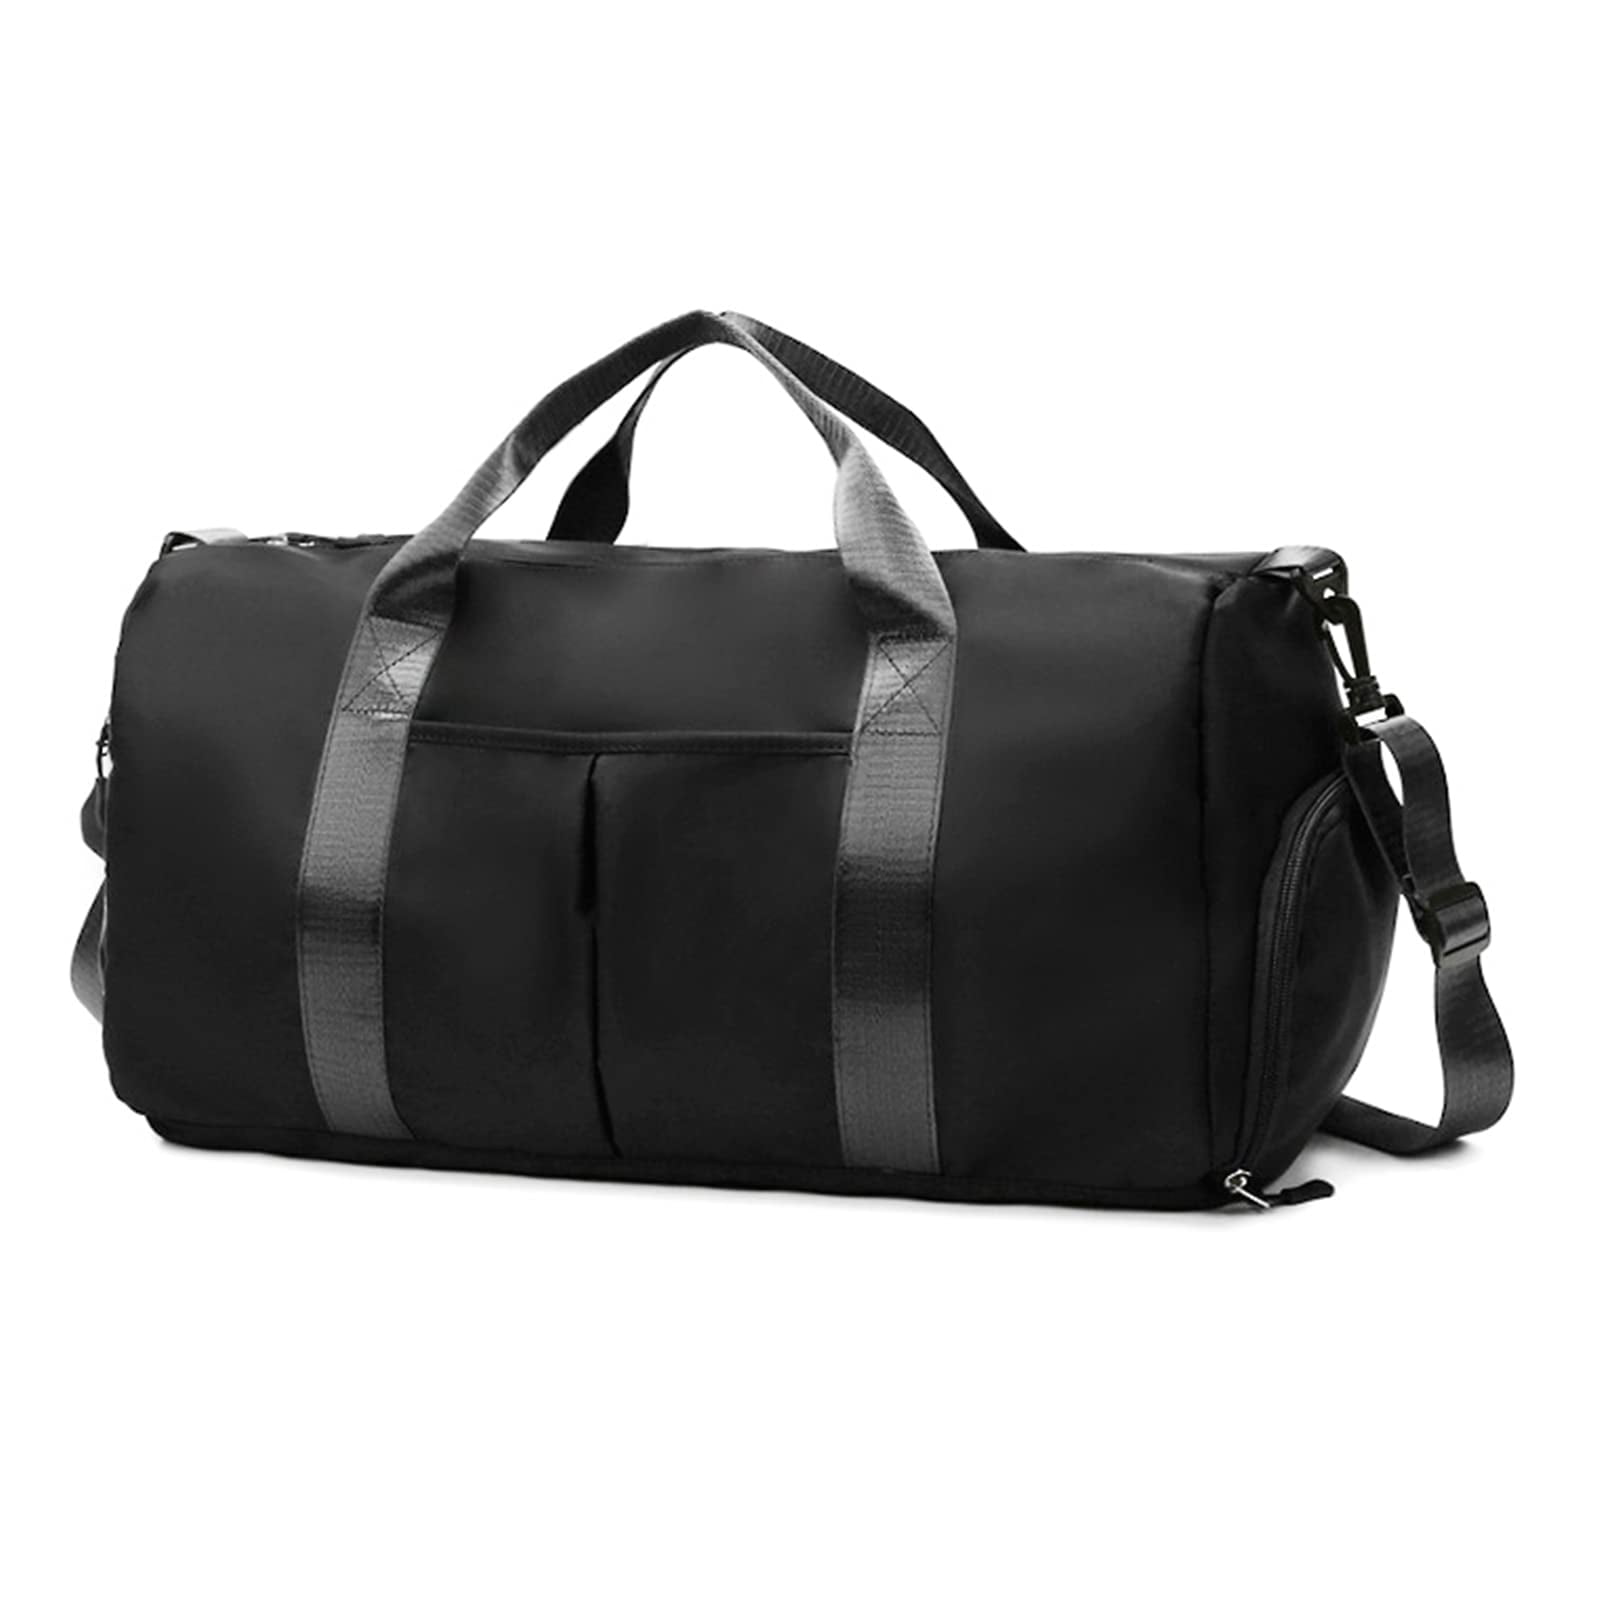  Gym Bag for Women and Men Duffle Bag for Men with Shoe  Compartment, Women Sports Duffel Bags for Traveling with Wet Pocket, Gym  Backpack for Men Workout Weekender, Obsidian Black